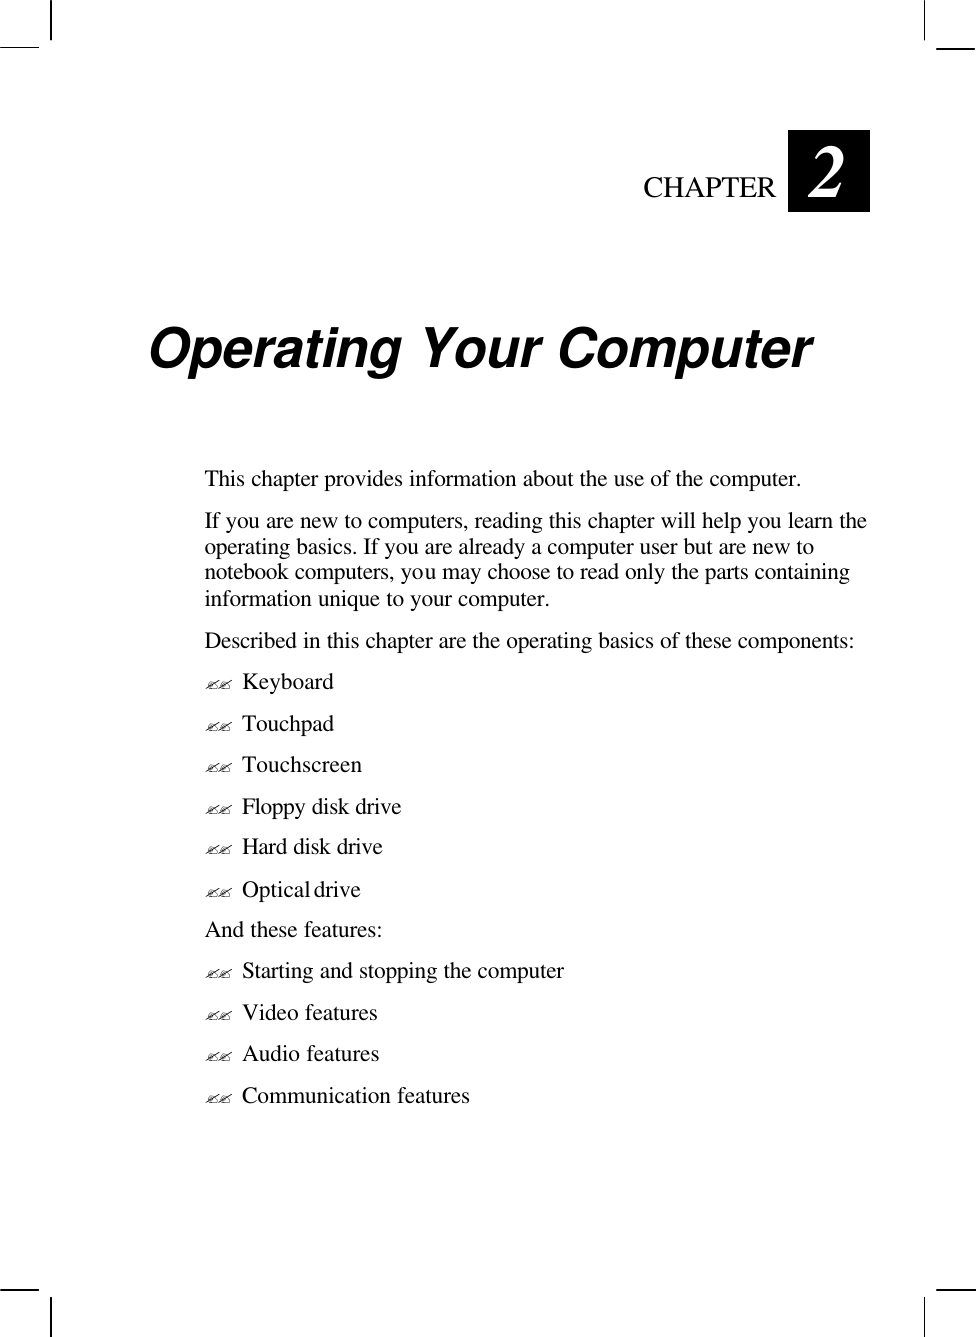   CHAPTER 2 Operating Your Computer This chapter provides information about the use of the computer. If you are new to computers, reading this chapter will help you learn the operating basics. If you are already a computer user but are new to notebook computers, you may choose to read only the parts containing information unique to your computer. Described in this chapter are the operating basics of these components: ?? Keyboard ?? Touchpad ?? Touchscreen ?? Floppy disk drive ?? Hard disk drive ?? Optical drive And these features: ?? Starting and stopping the computer ?? Video features ?? Audio features ?? Communication features  